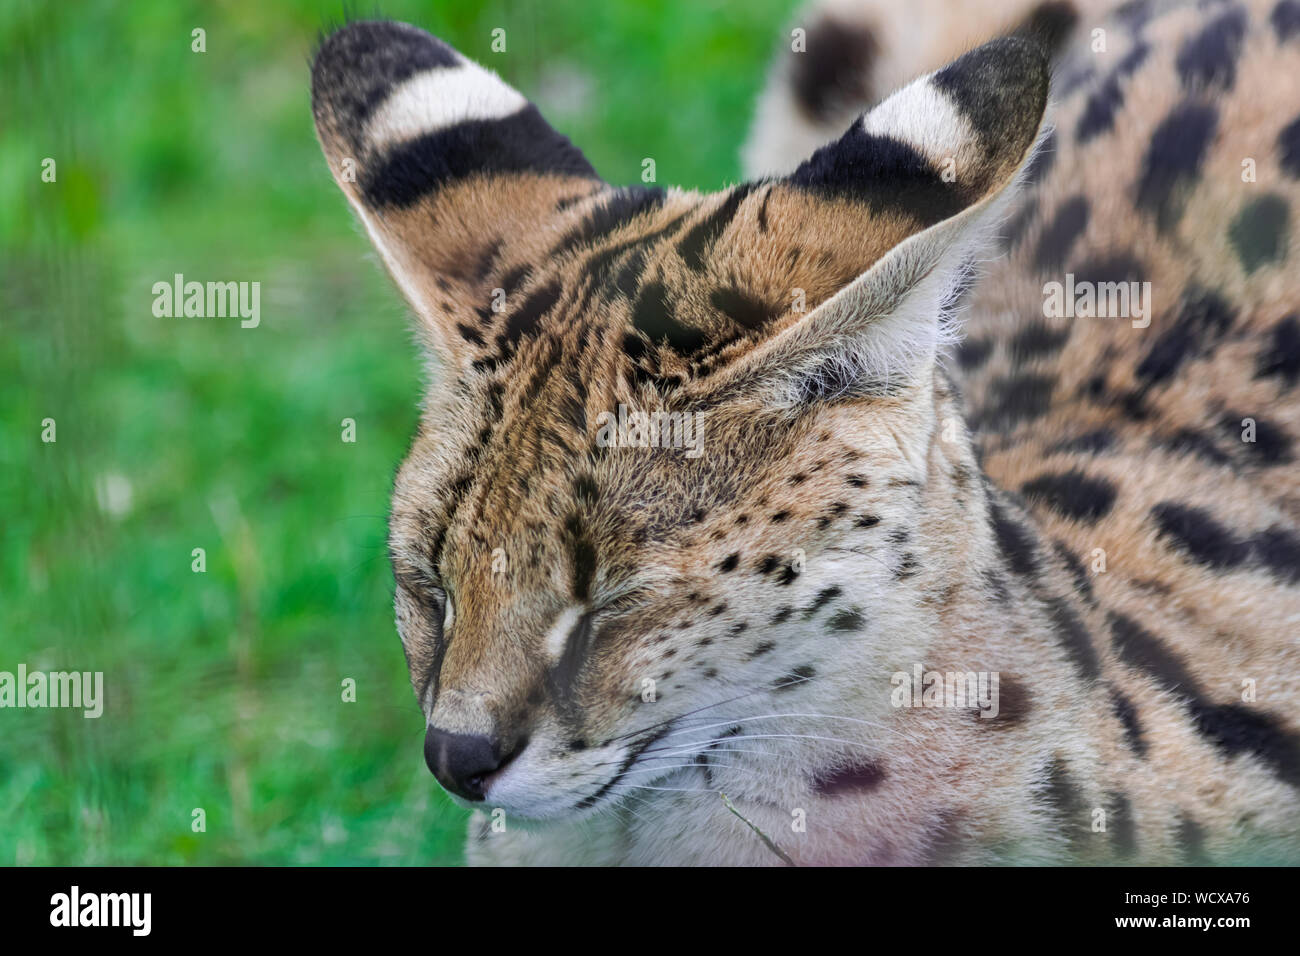 Serval cat (Leptailurus serval), sitting on green grass field, with closed eyes, head portrait Stock Photo